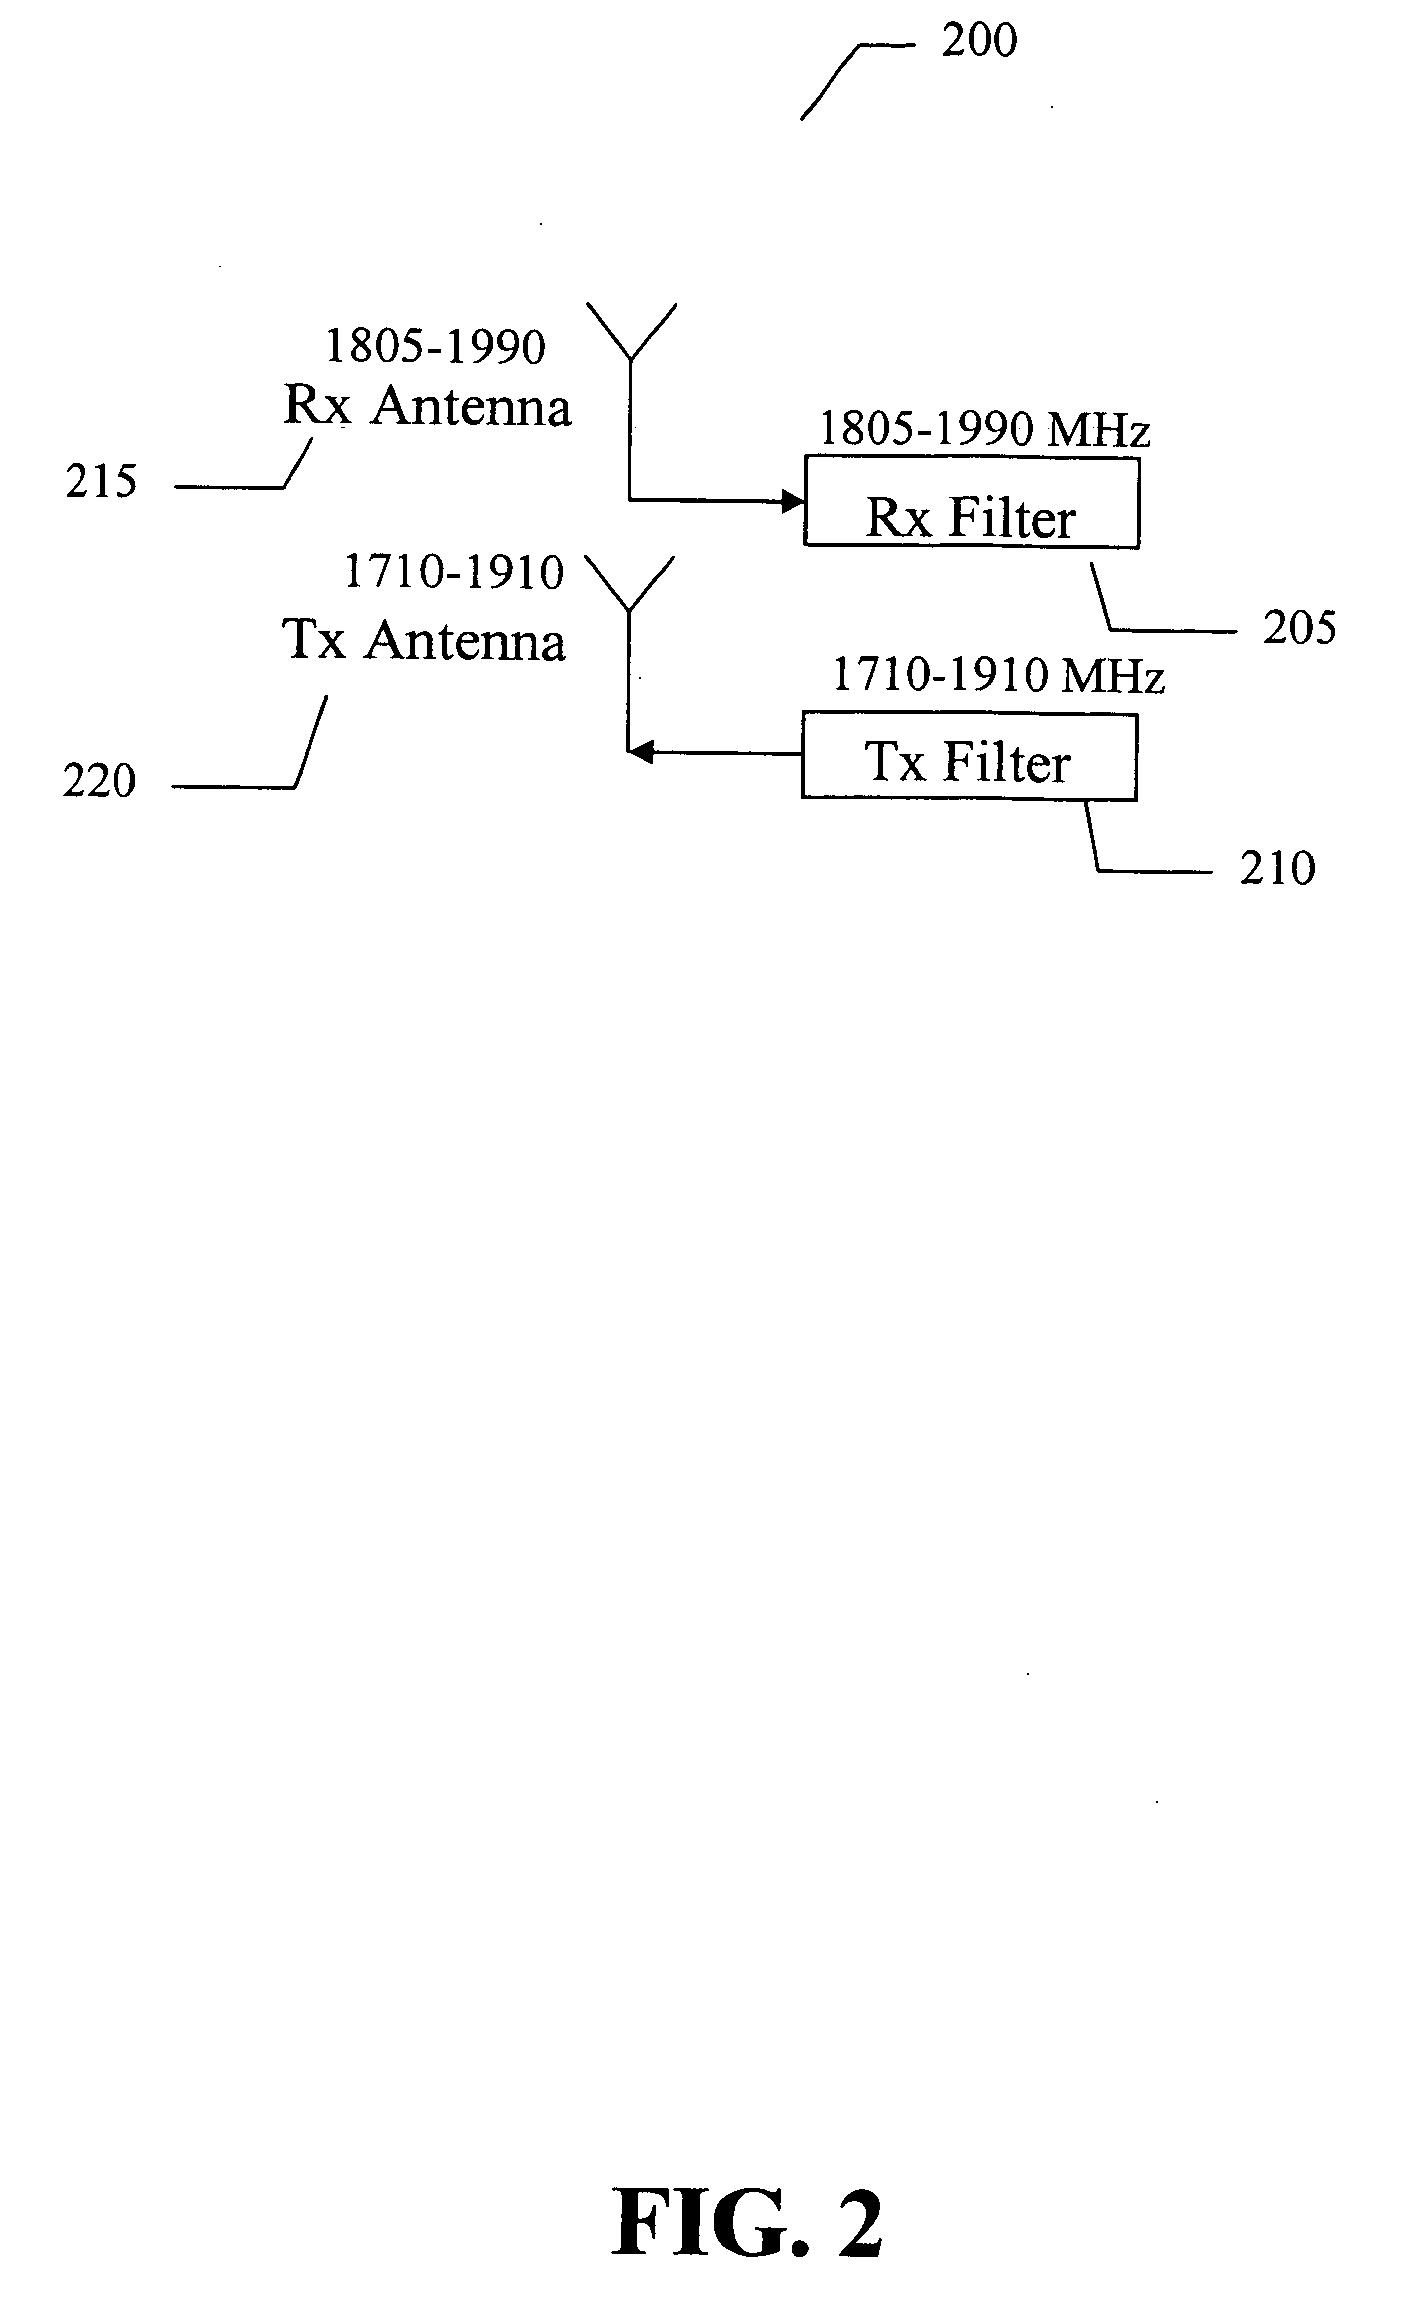 Apparatus and method capable of utilizing a tunable antenna-duplexer combination